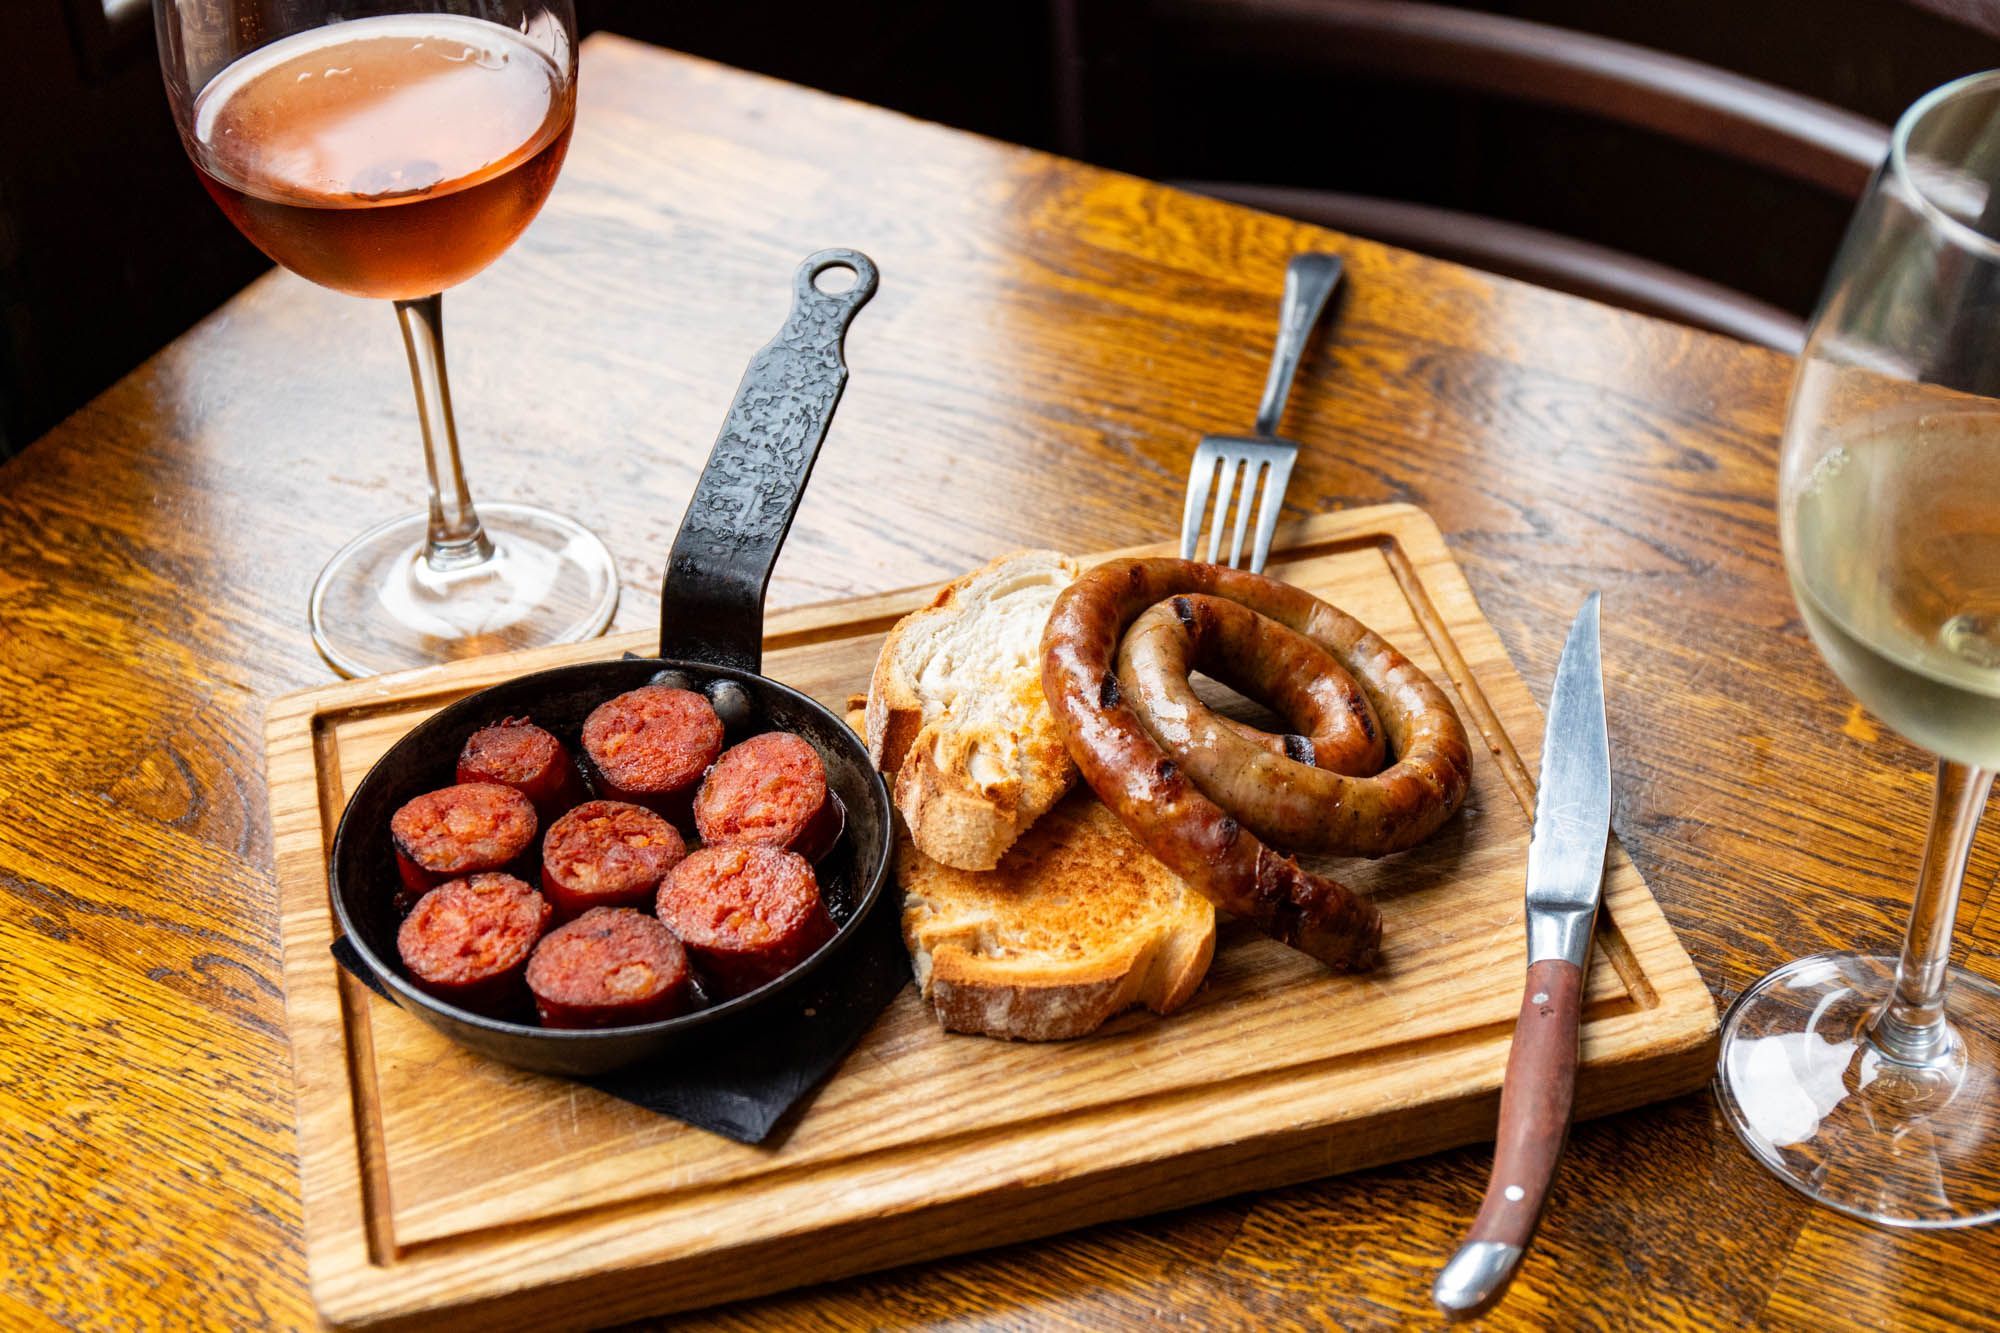 red sausage bits in the small black pan, and rolled sausage with bread served on the board and with glass of red